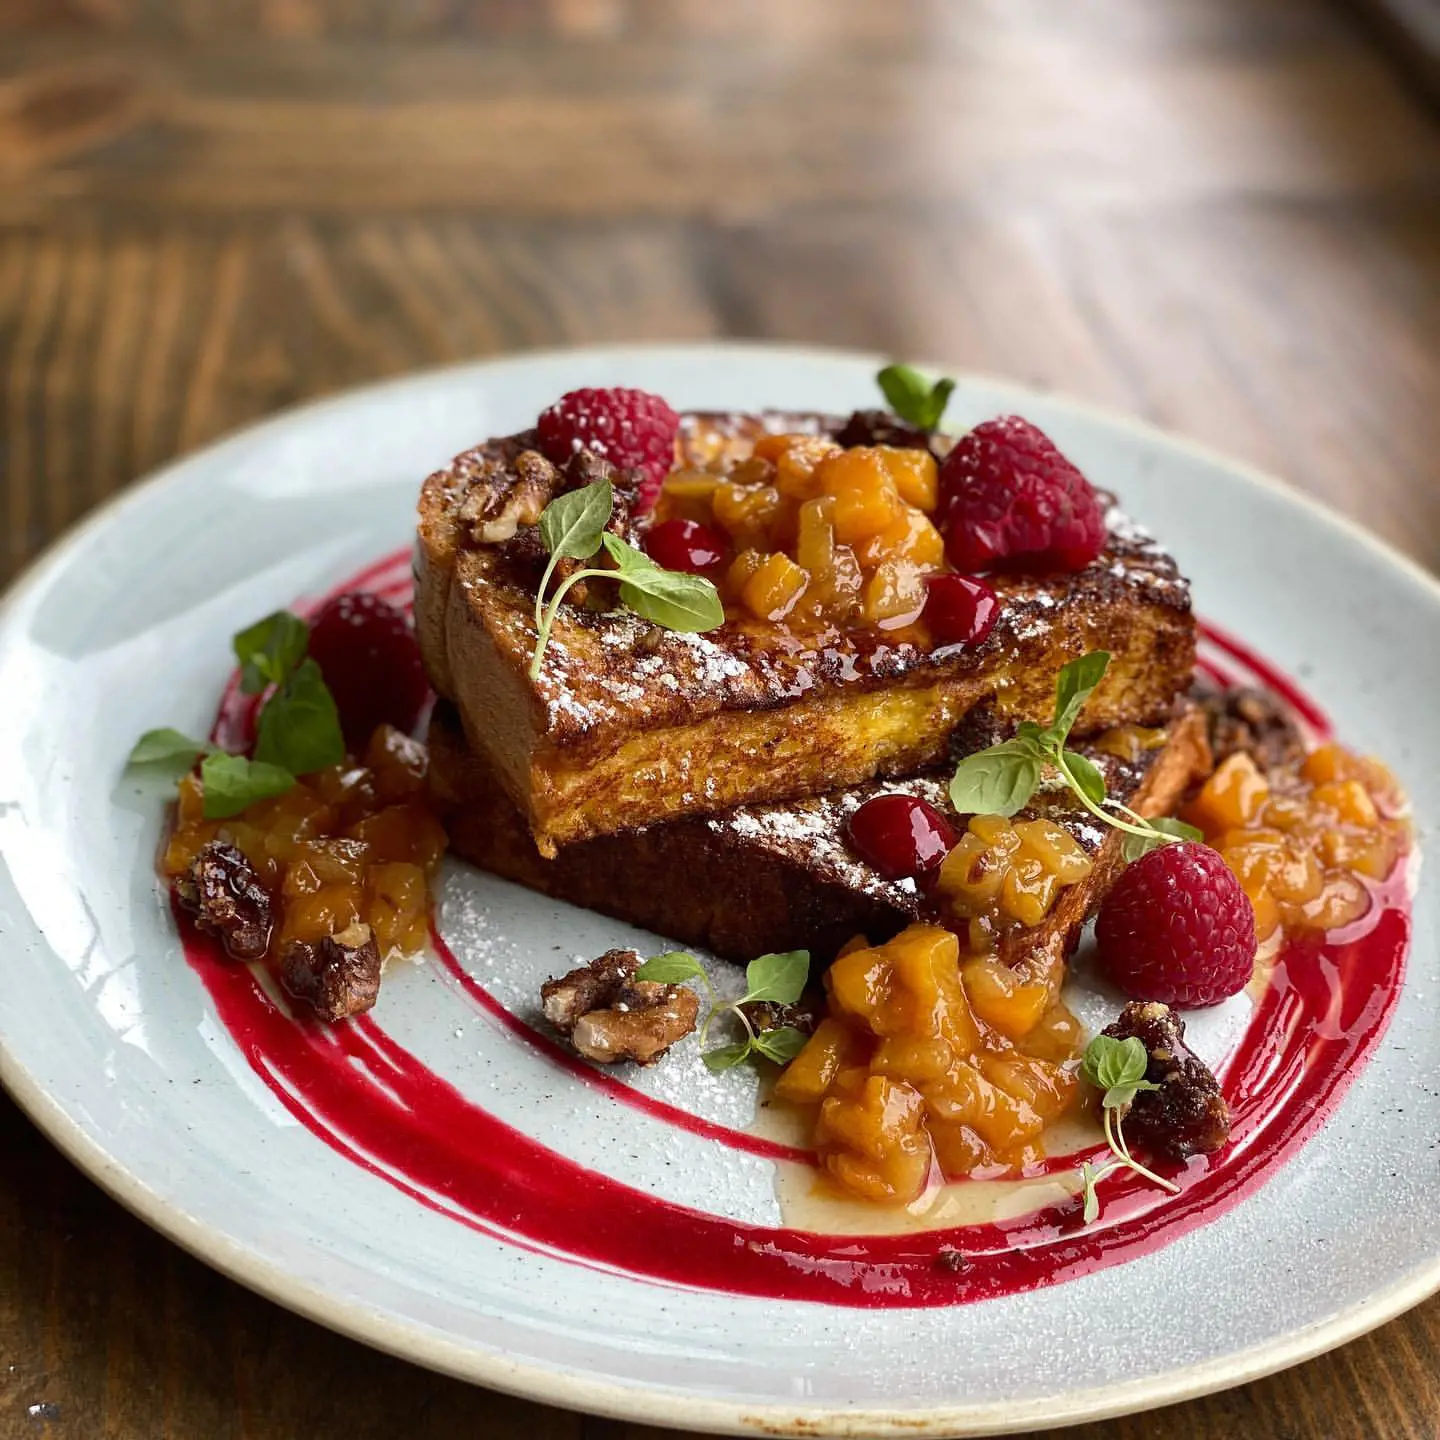 Brioche French Toast with Peach Compote, Raspberry Coulis and Candied Walnuts